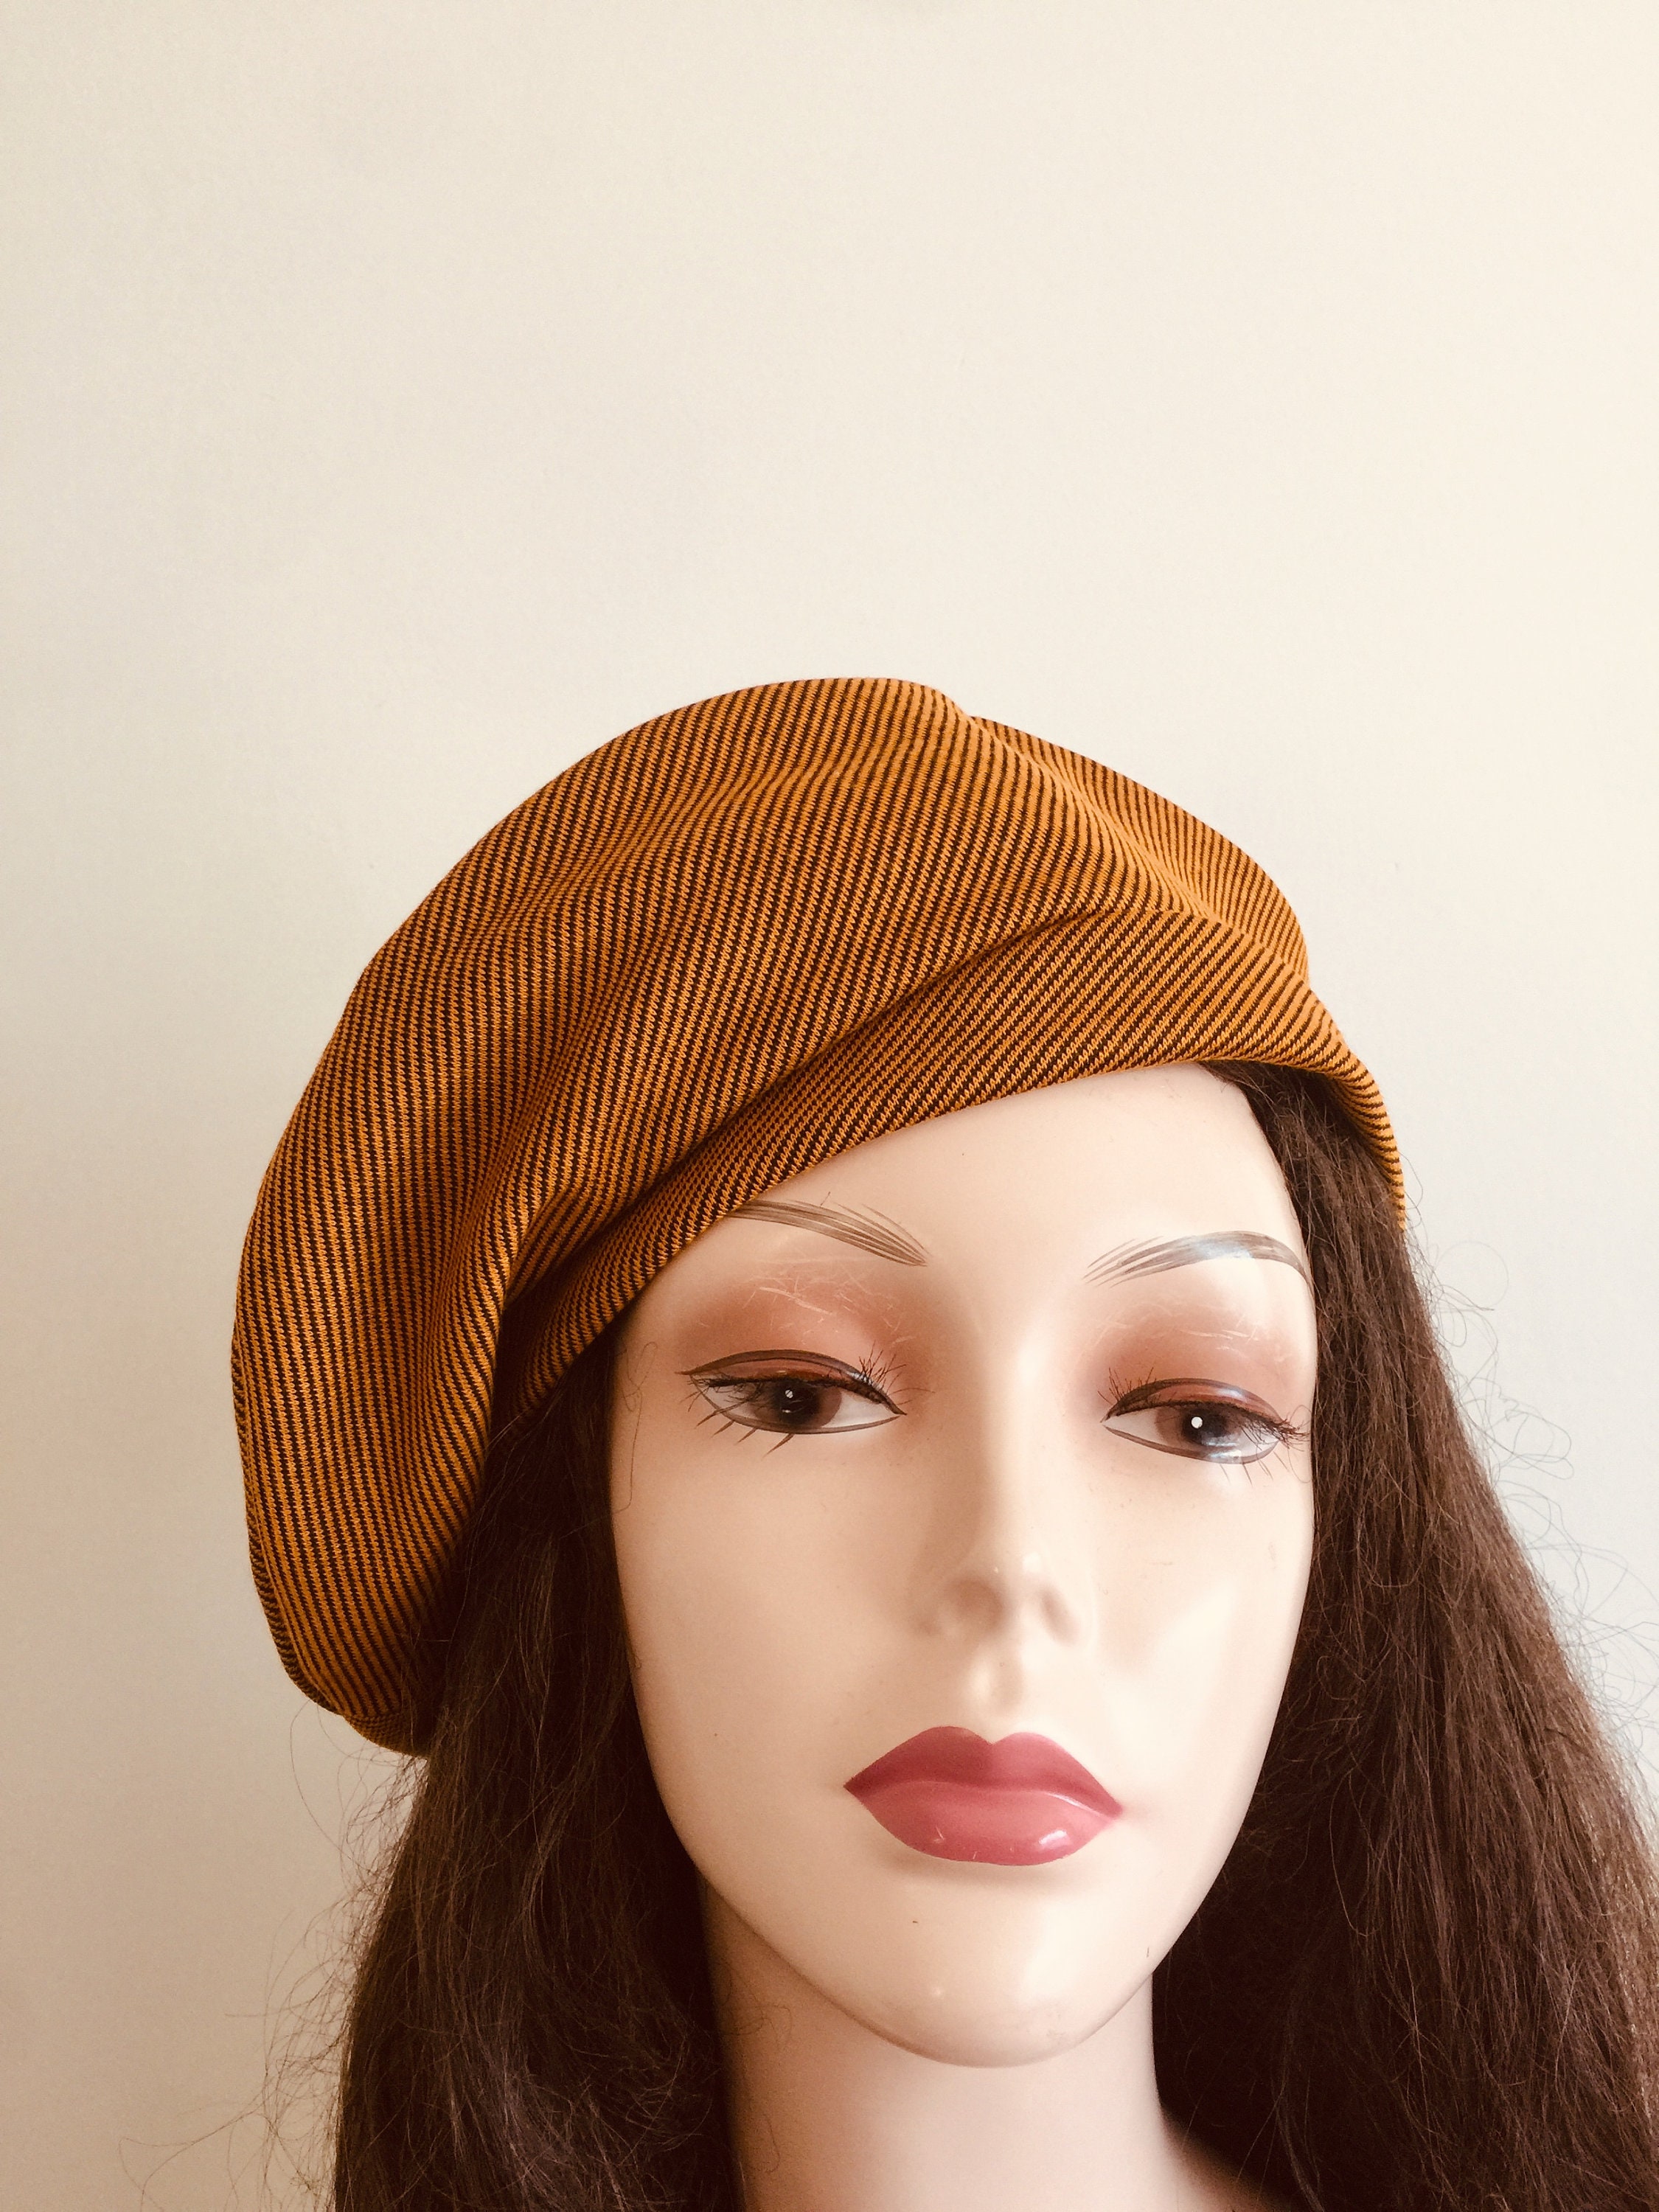 NEW WOMEN'S WARM 100% WOOL FRENCH BERETS TAM BEANIE SLOUCH HAT